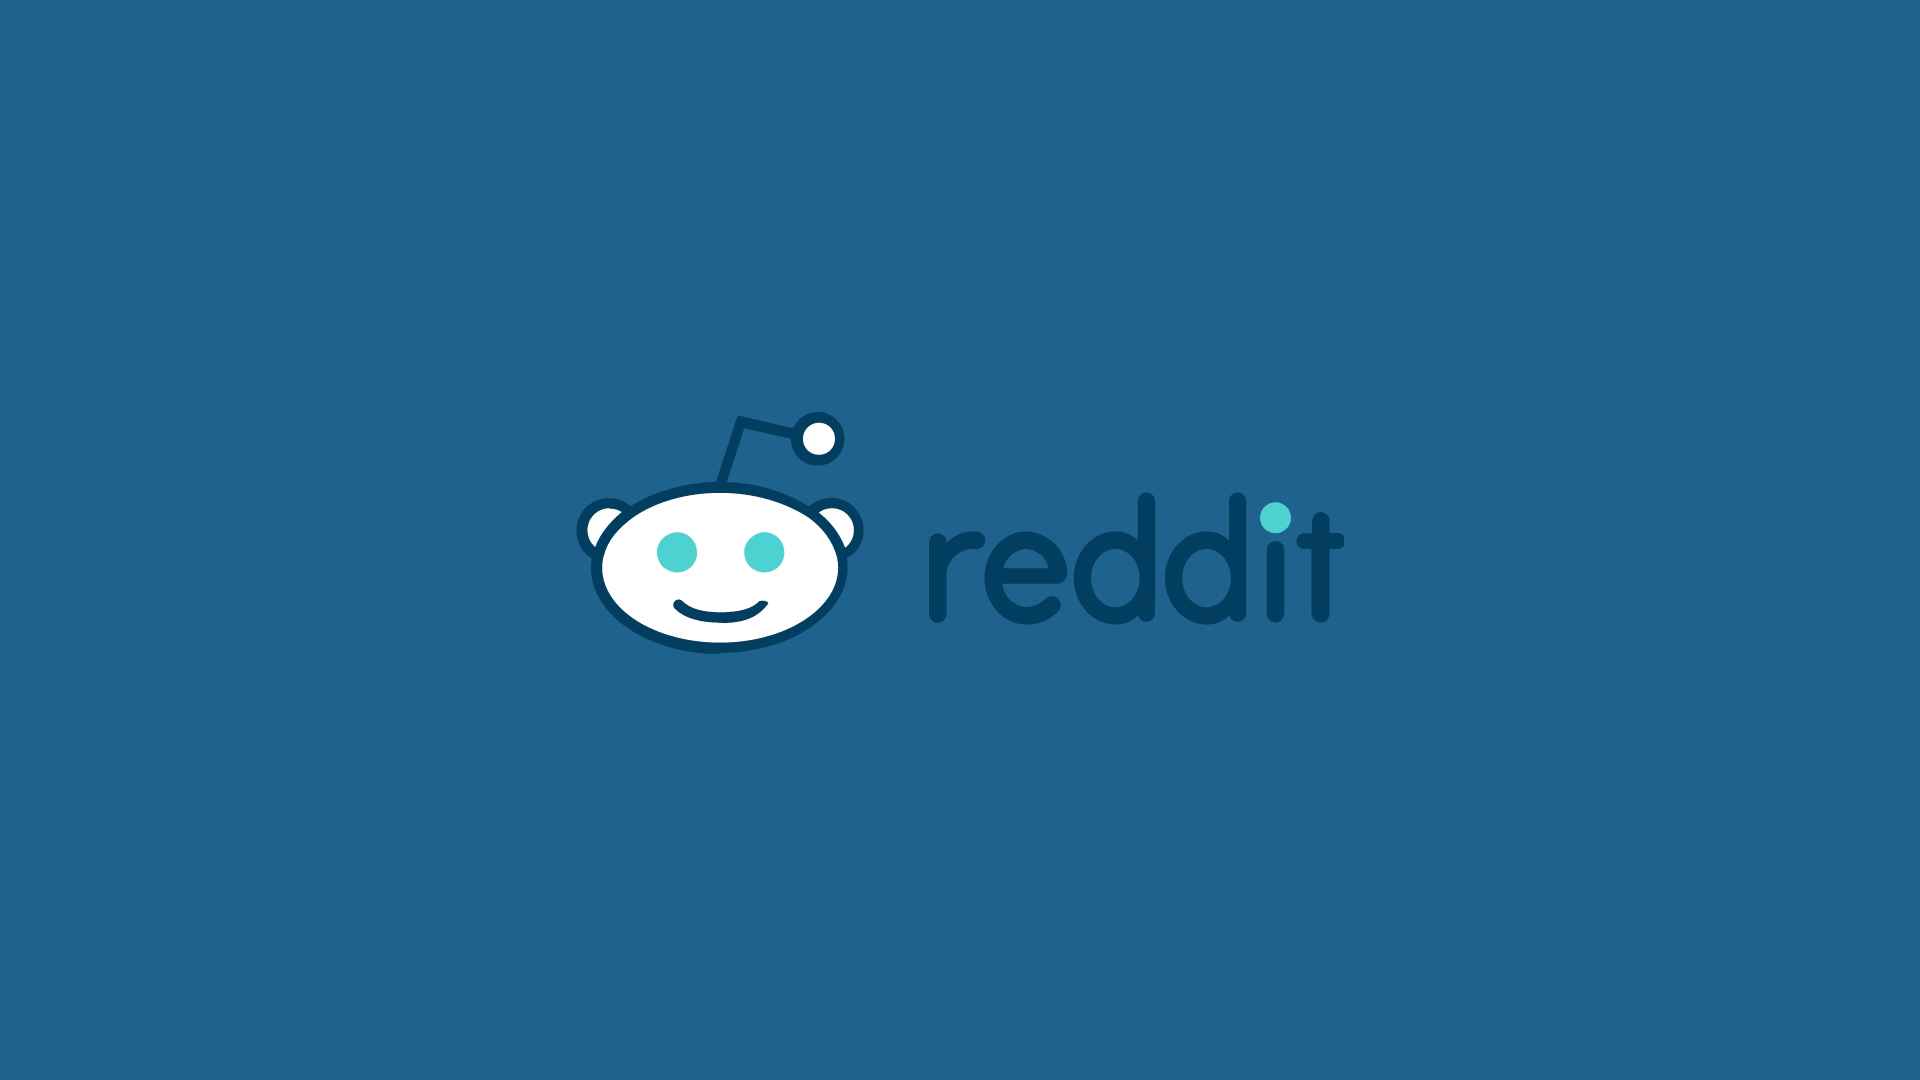 How does Reddit work and what is its main purpose?